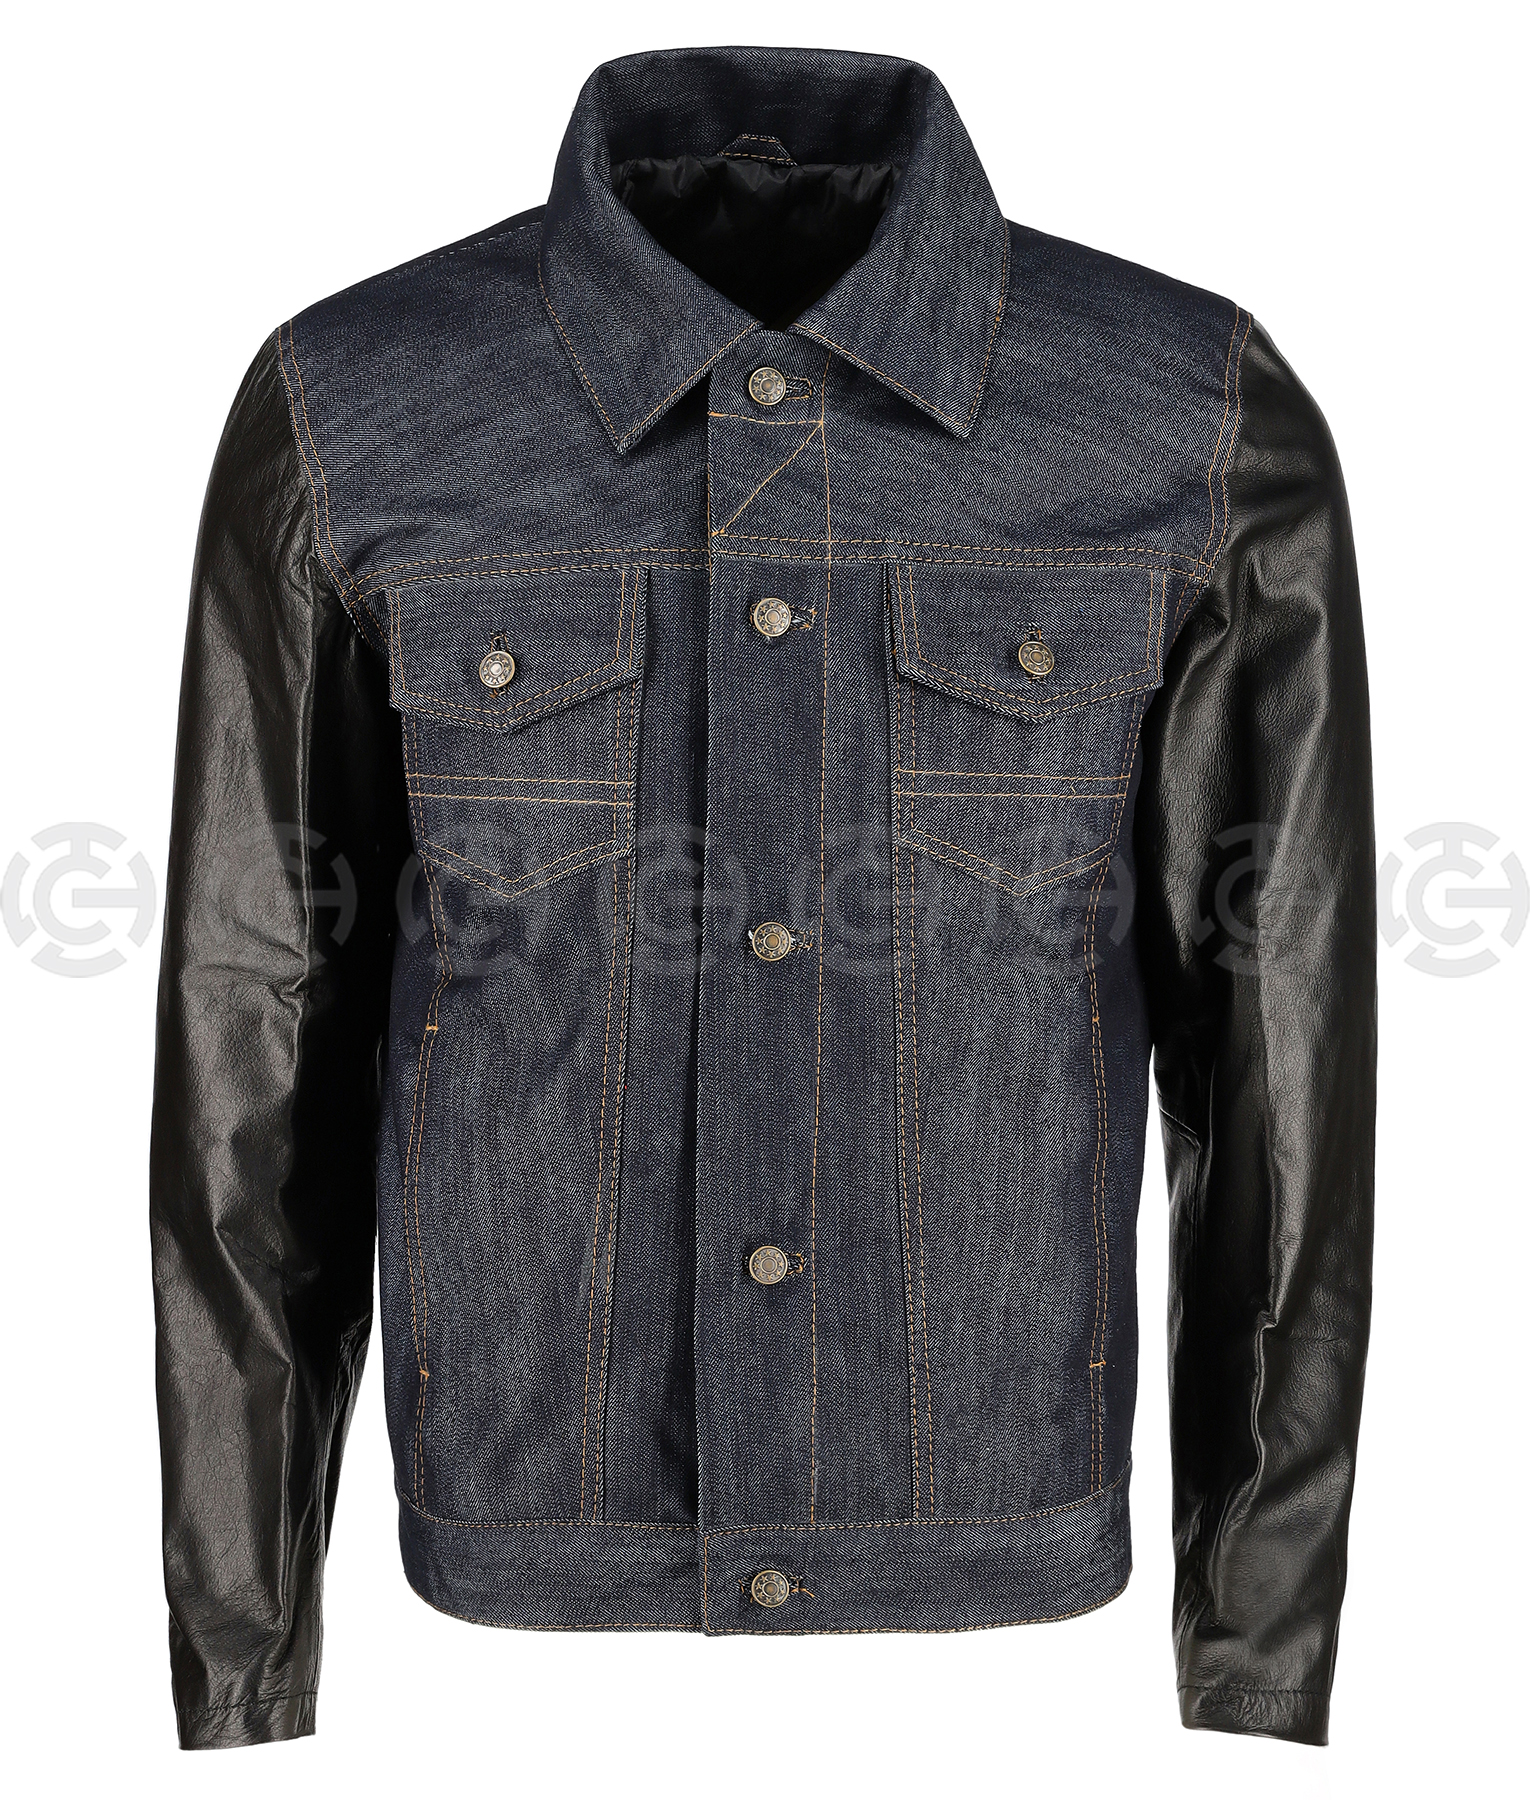 Mens Denim Jacket with Leather Sleeves 1